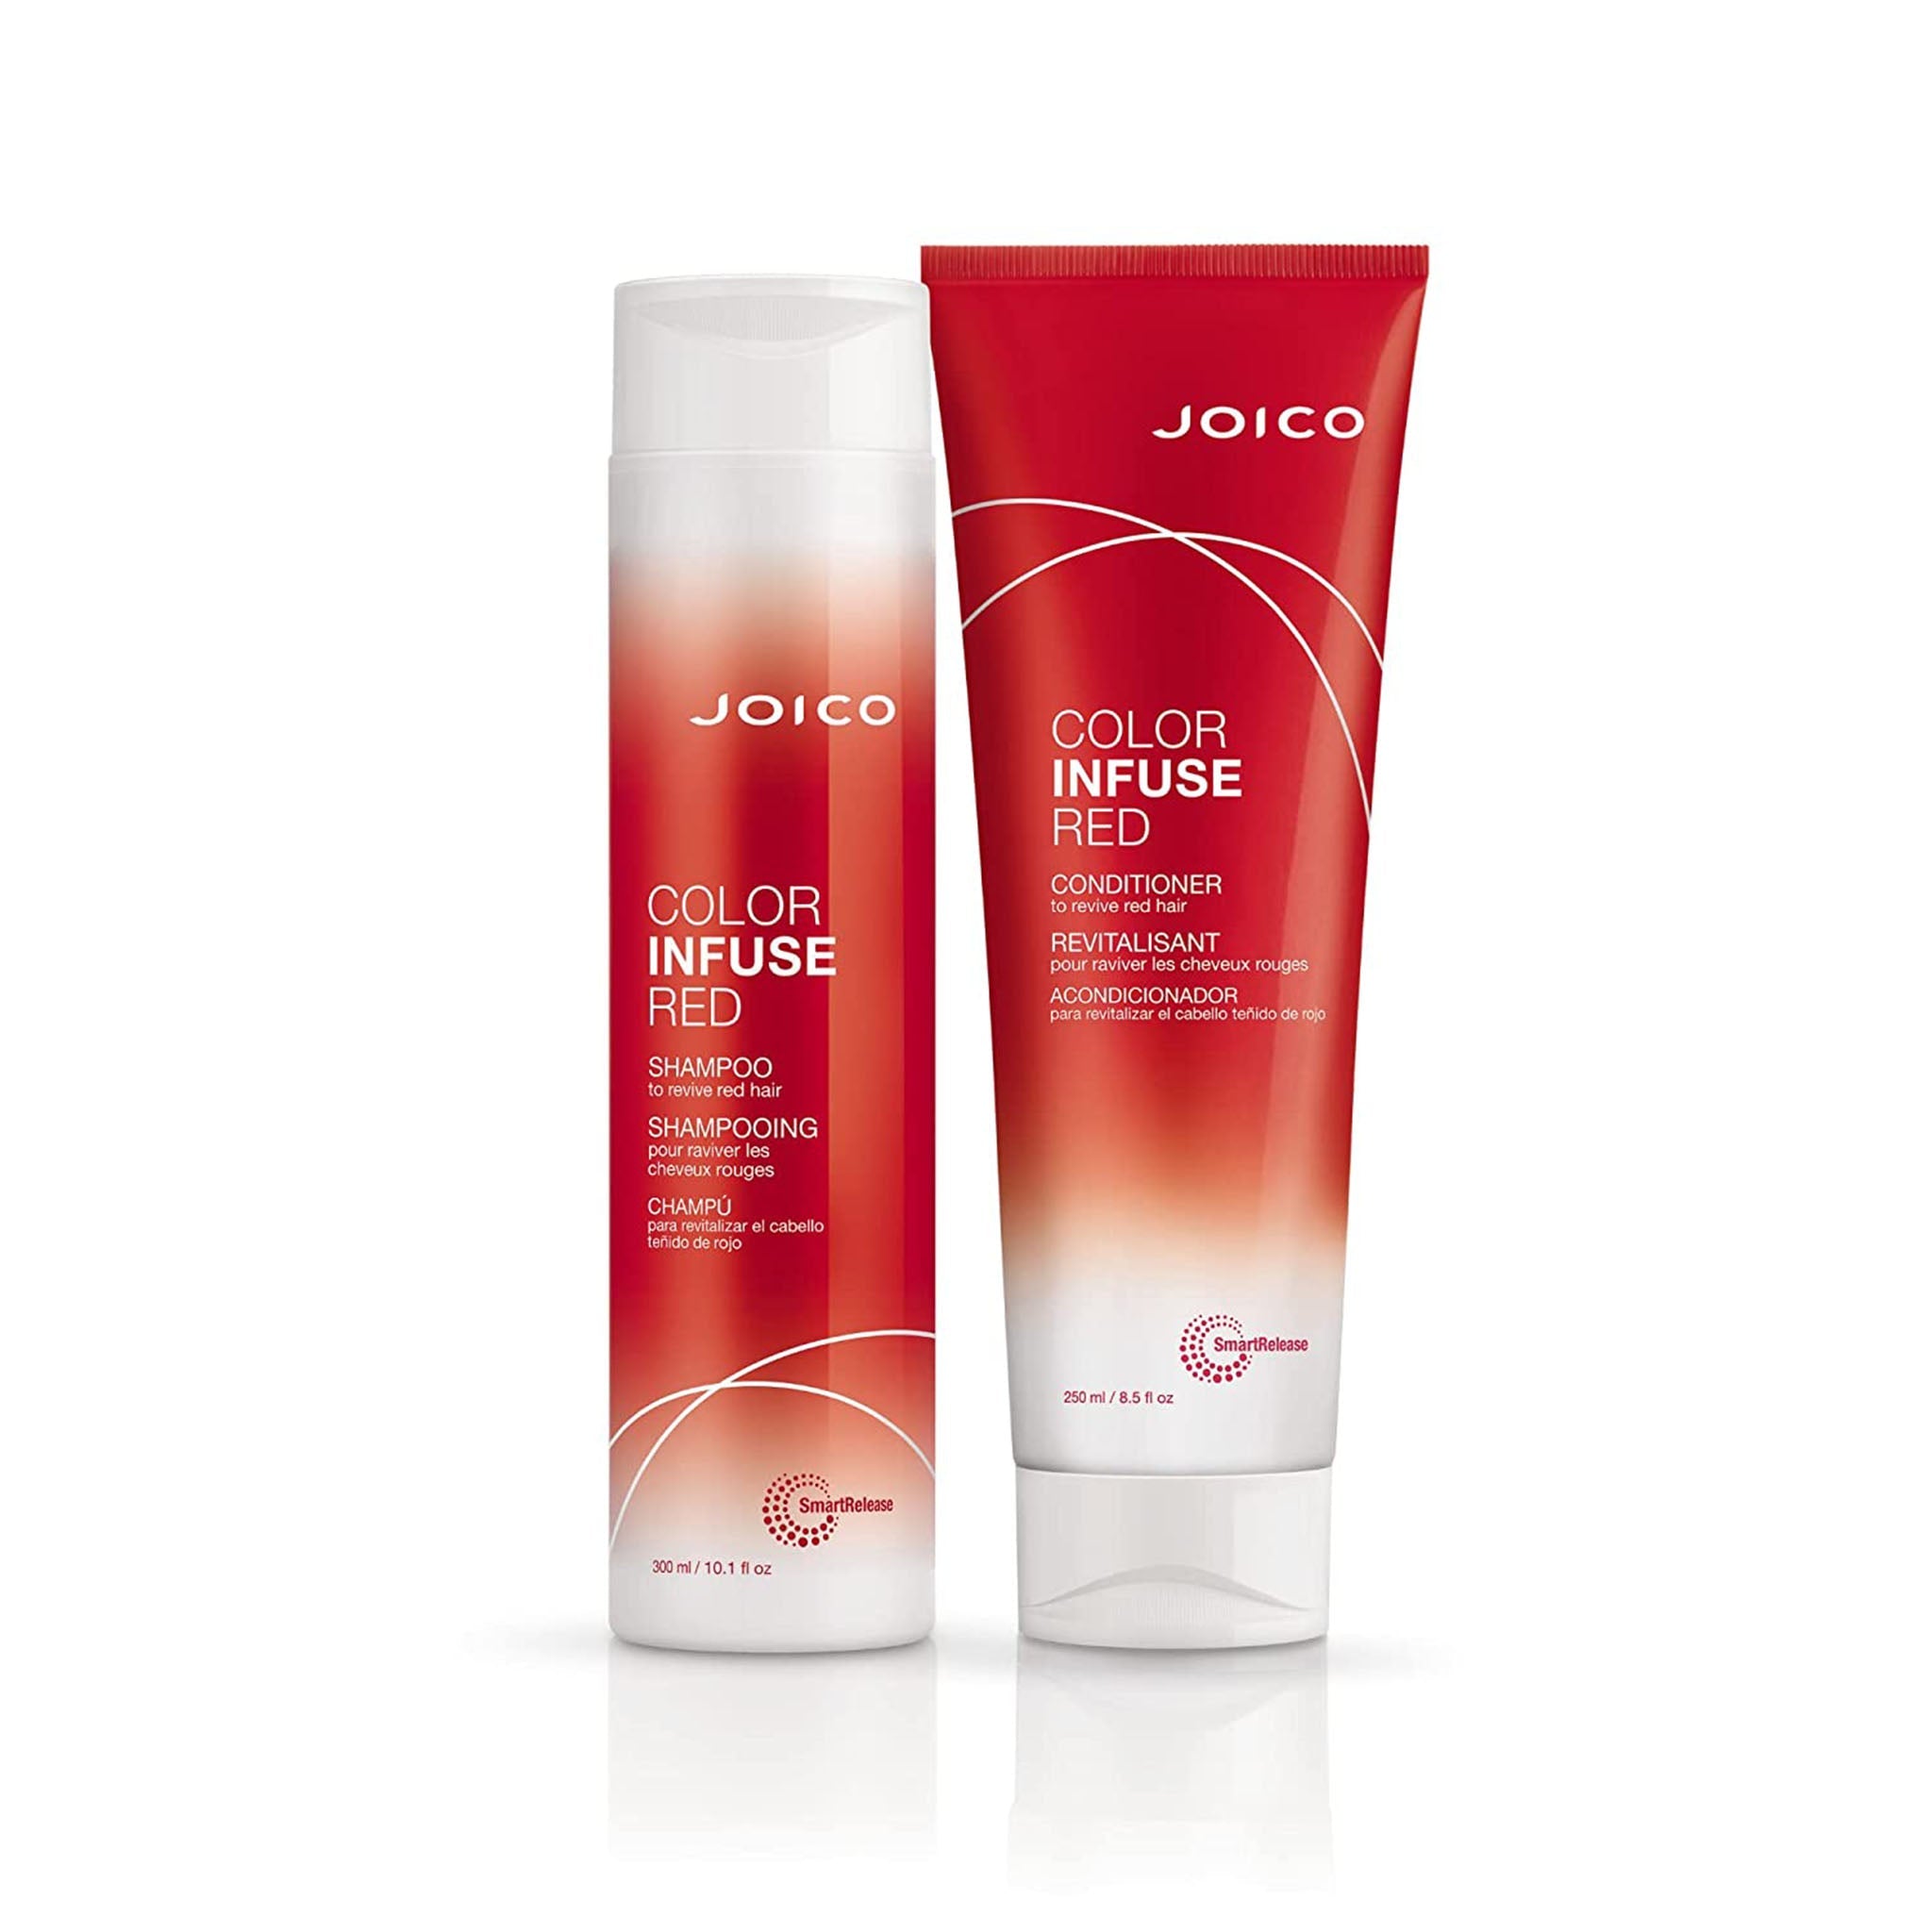 Joico. Revitalisant Rouge Color Infuse Red - 250 ml - Concept C. Shop